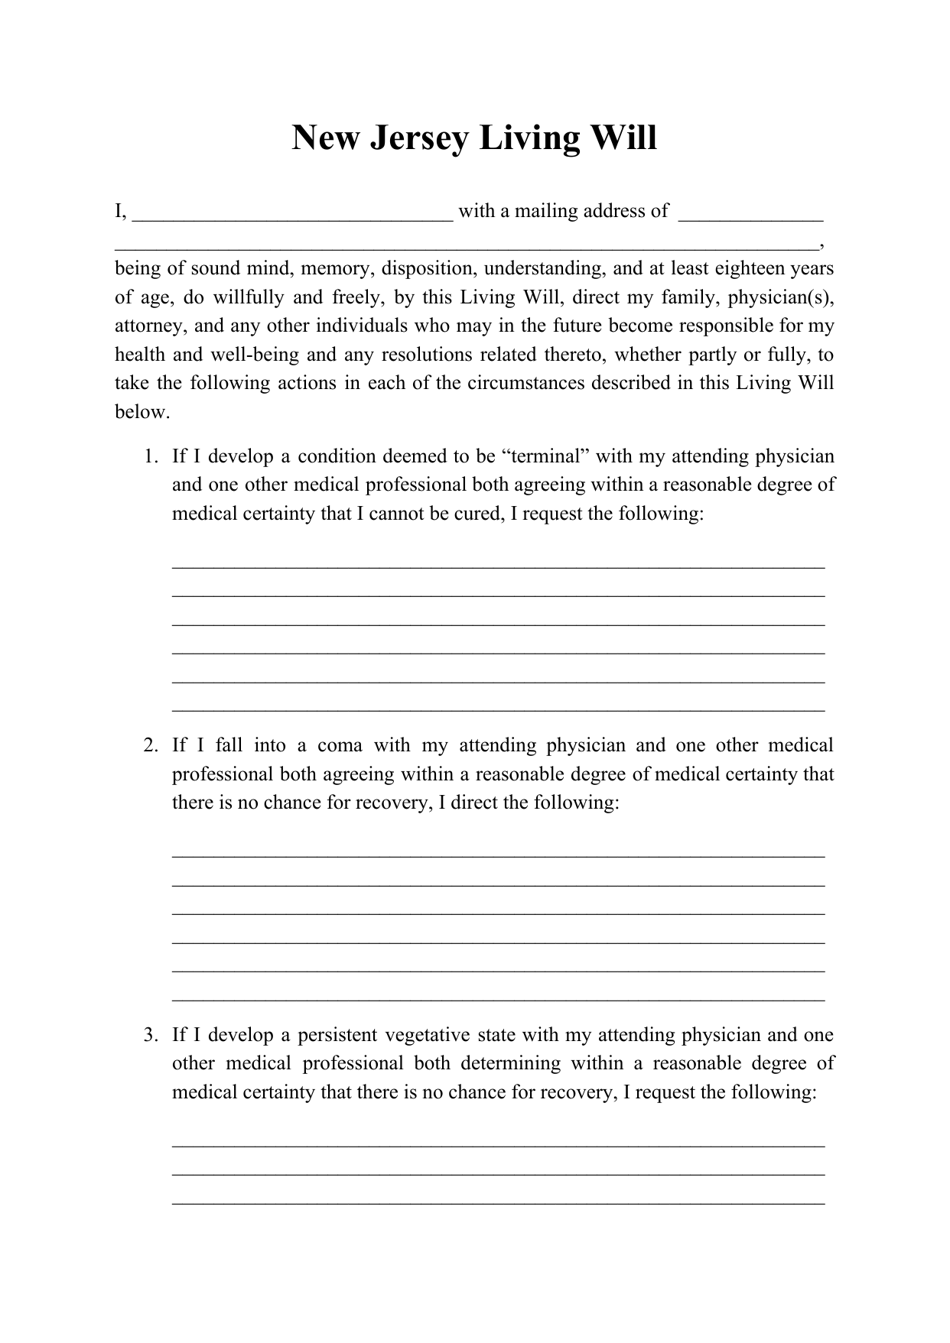 New Jersey Living Trust Form